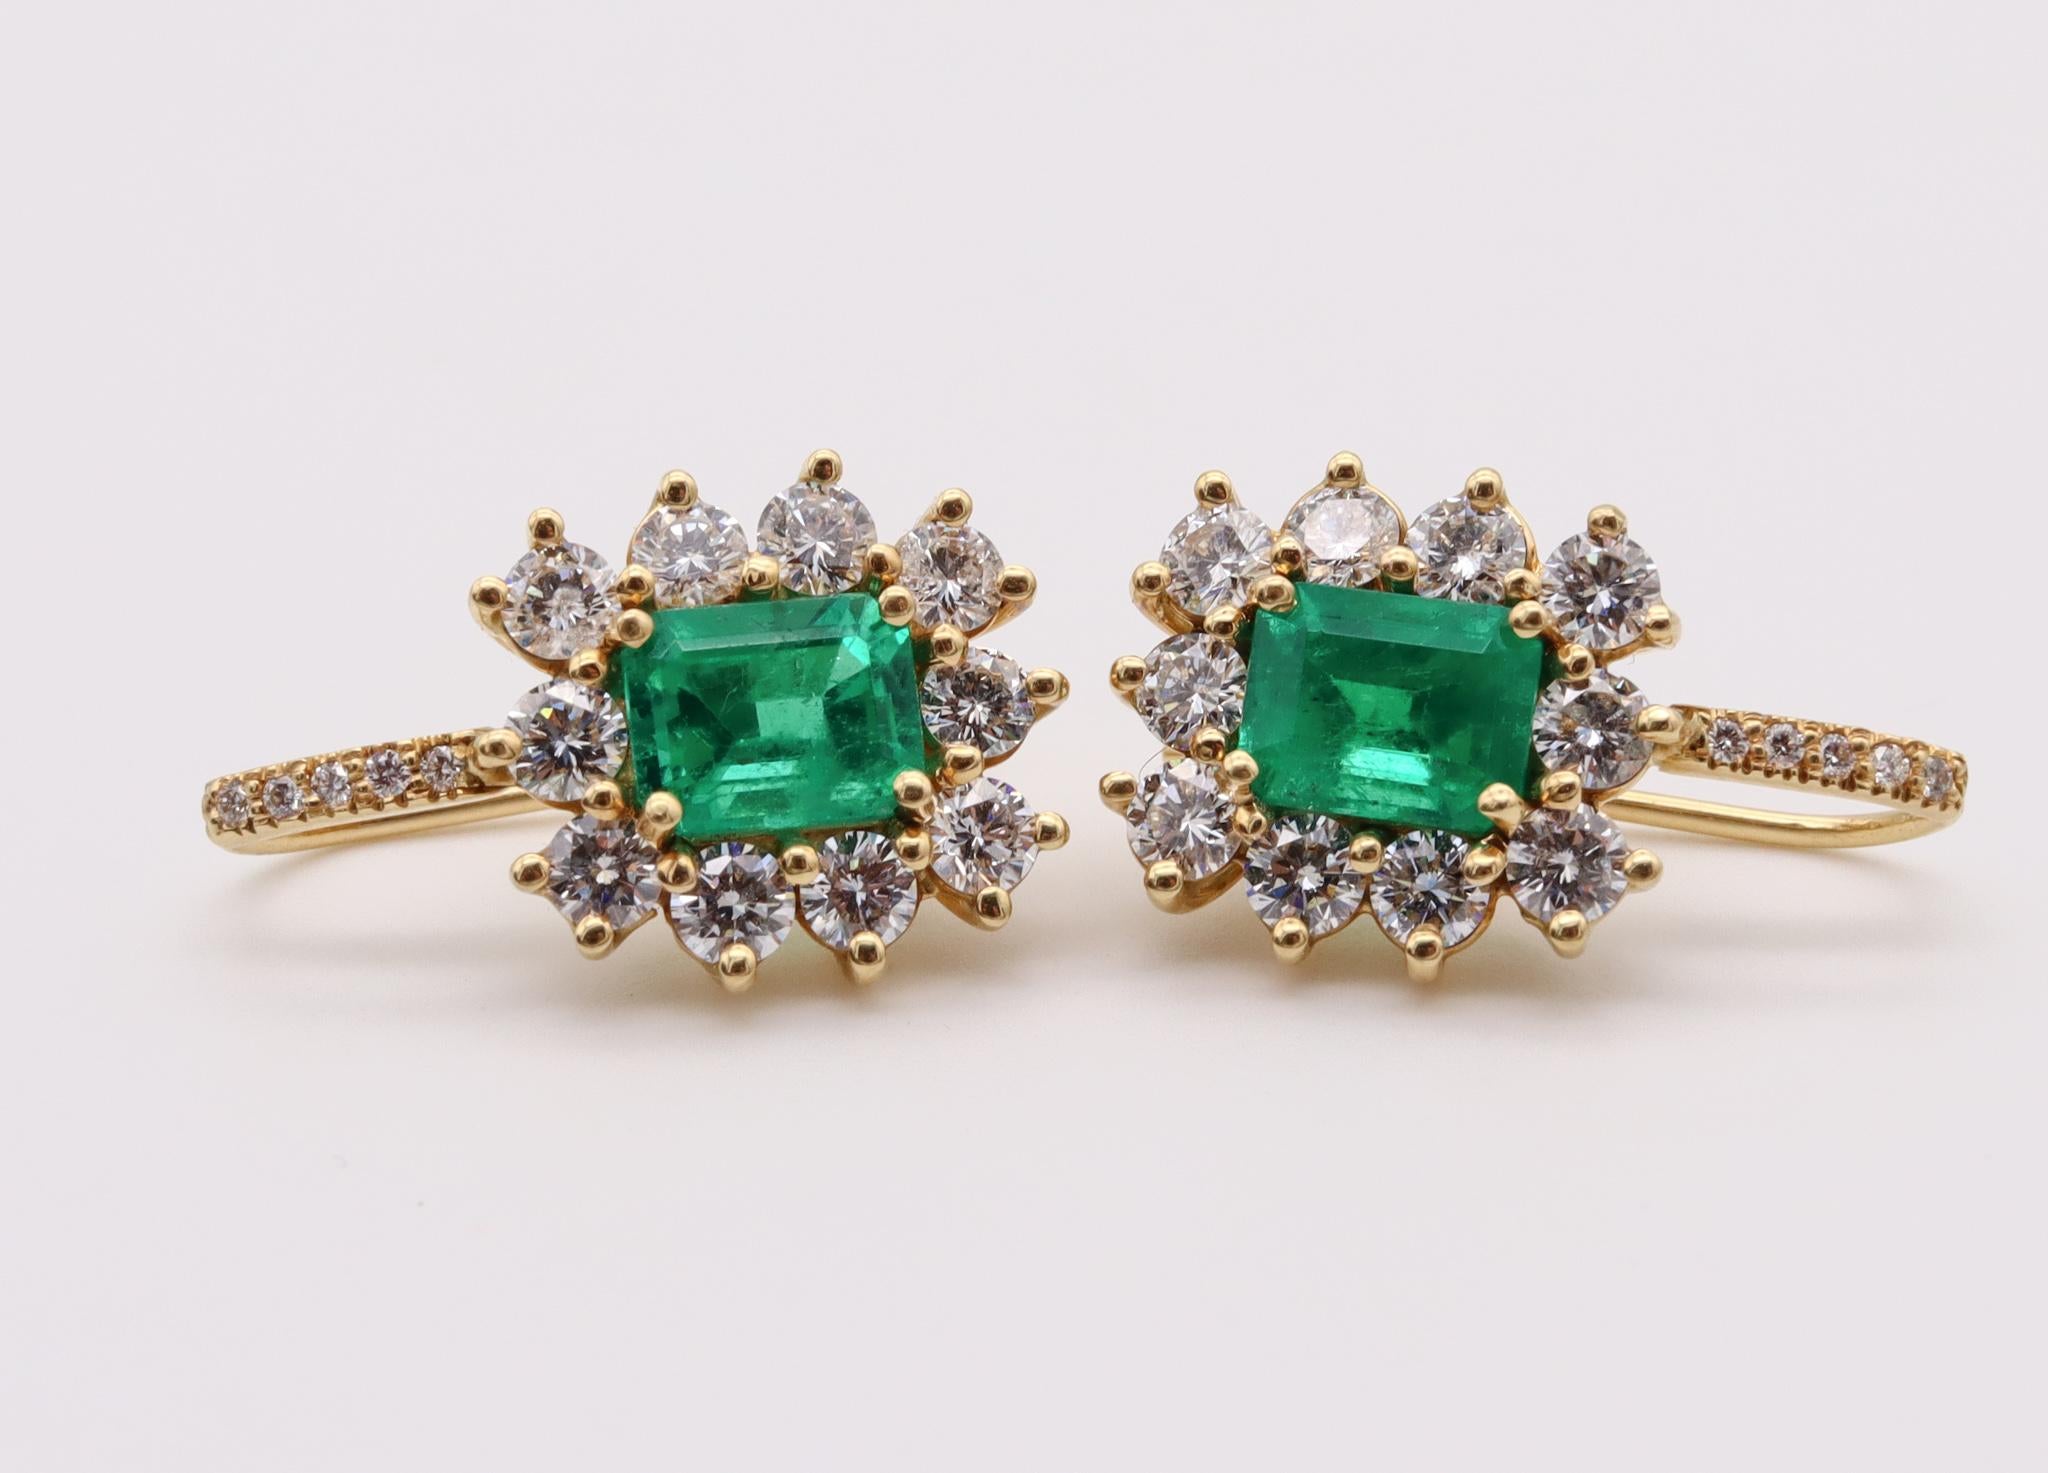 French Hook Earrings in 18kt Yellow Gold with 4.92 Ctw in Diamonds and Emeralds 1